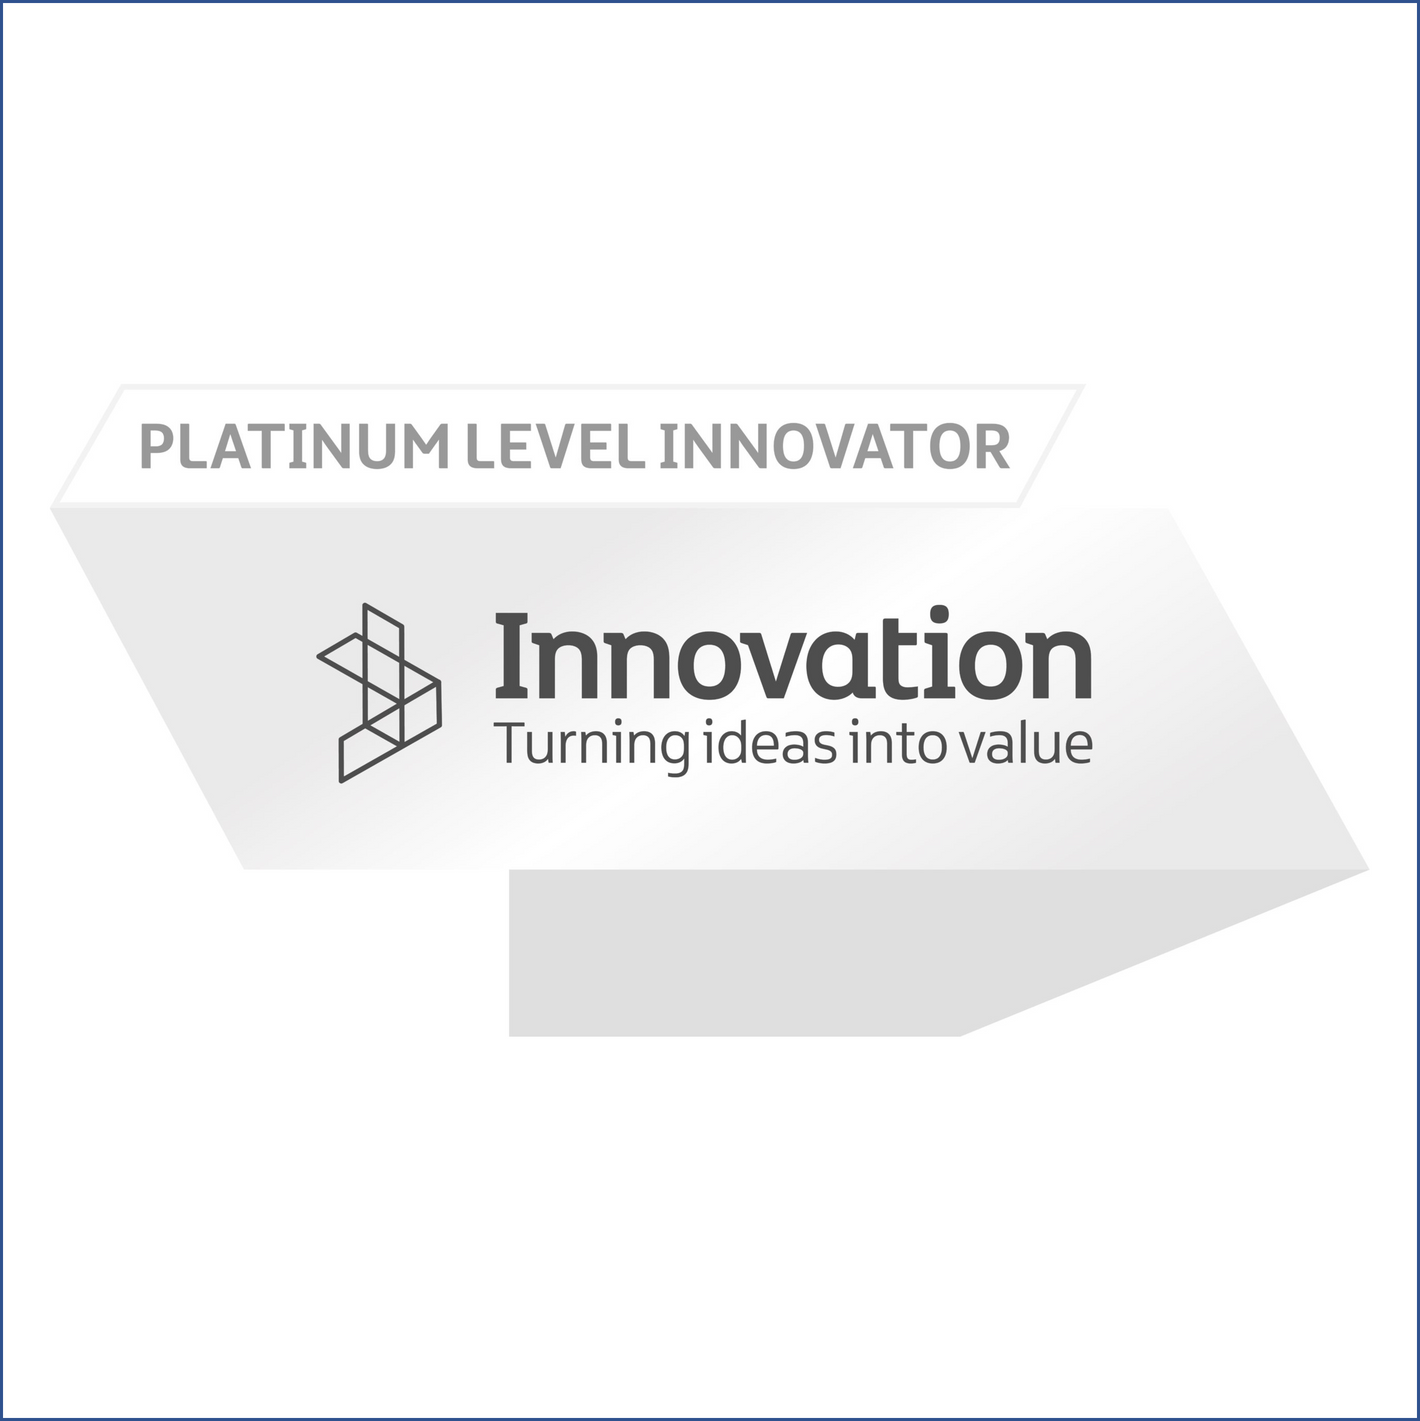 The Innovate NI Platinum Level Innovator logo awarded to CCP Gransden for demonstrating a succesful history of innovative activity in Northern Ireland in the field of composites.